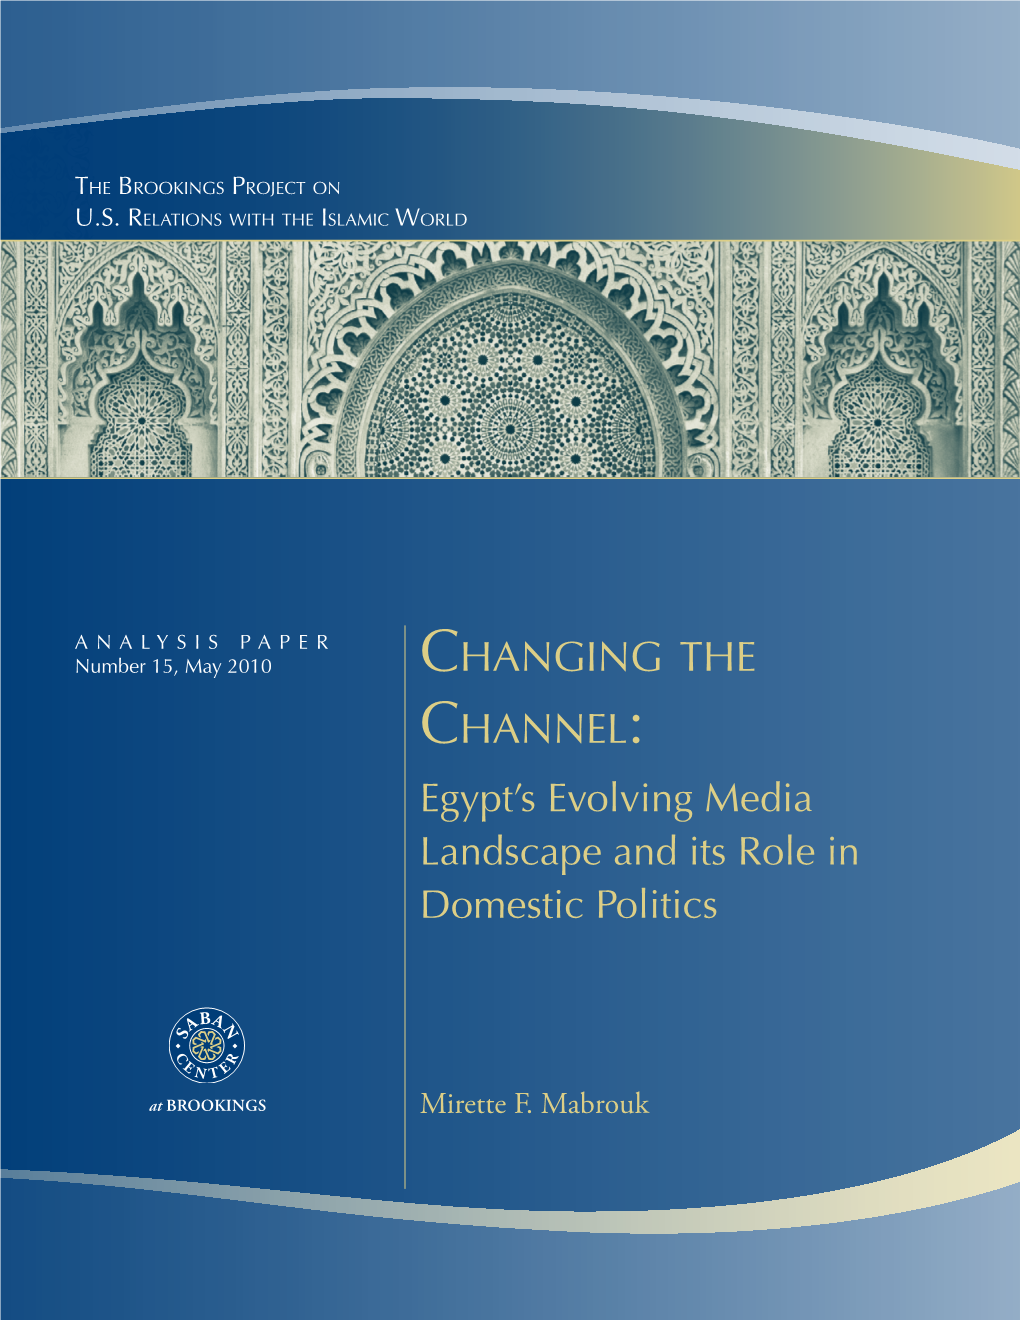 Changing the Channel: Egypt's Evolving Media Landscape and Its